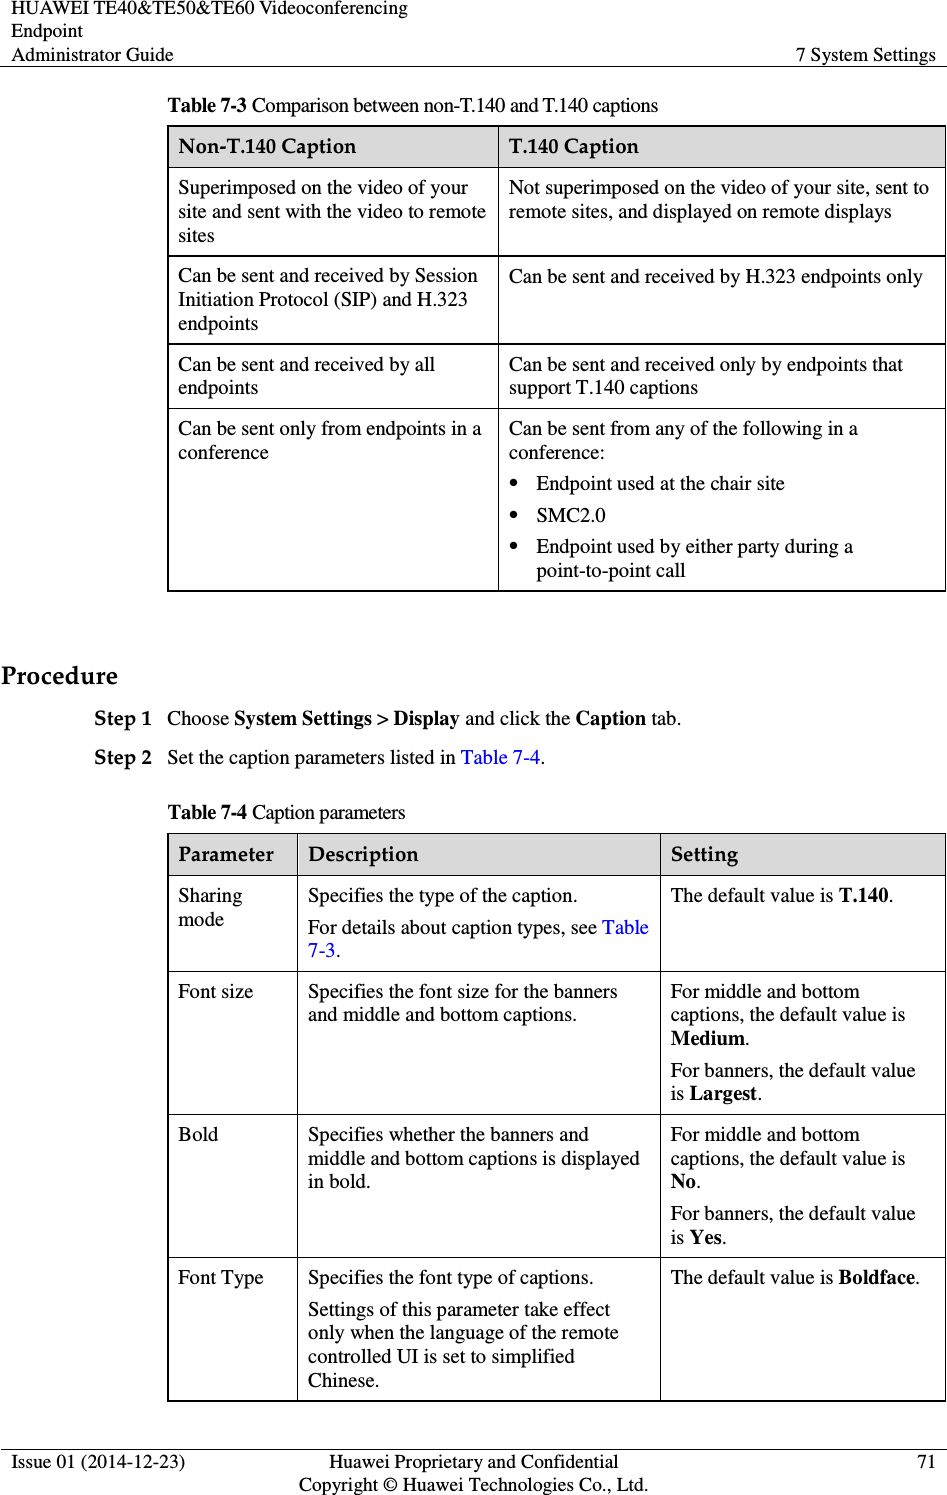 HUAWEI TE40&amp;TE50&amp;TE60 Videoconferencing Endpoint Administrator Guide  7 System Settings  Issue 01 (2014-12-23)  Huawei Proprietary and Confidential                                     Copyright © Huawei Technologies Co., Ltd. 71  Table 7-3 Comparison between non-T.140 and T.140 captions Non-T.140 Caption  T.140 Caption Superimposed on the video of your site and sent with the video to remote sites Not superimposed on the video of your site, sent to remote sites, and displayed on remote displays Can be sent and received by Session Initiation Protocol (SIP) and H.323 endpoints Can be sent and received by H.323 endpoints only Can be sent and received by all endpoints Can be sent and received only by endpoints that support T.140 captions Can be sent only from endpoints in a conference Can be sent from any of the following in a conference:  Endpoint used at the chair site  SMC2.0  Endpoint used by either party during a point-to-point call  Procedure Step 1 Choose System Settings &gt; Display and click the Caption tab.   Step 2 Set the caption parameters listed in Table 7-4. Table 7-4 Caption parameters Parameter  Description  Setting Sharing mode Specifies the type of the caption.   For details about caption types, see Table 7-3. The default value is T.140. Font size  Specifies the font size for the banners and middle and bottom captions. For middle and bottom captions, the default value is Medium. For banners, the default value is Largest.   Bold  Specifies whether the banners and middle and bottom captions is displayed in bold. For middle and bottom captions, the default value is No. For banners, the default value is Yes.   Font Type  Specifies the font type of captions. Settings of this parameter take effect only when the language of the remote controlled UI is set to simplified Chinese.   The default value is Boldface. 